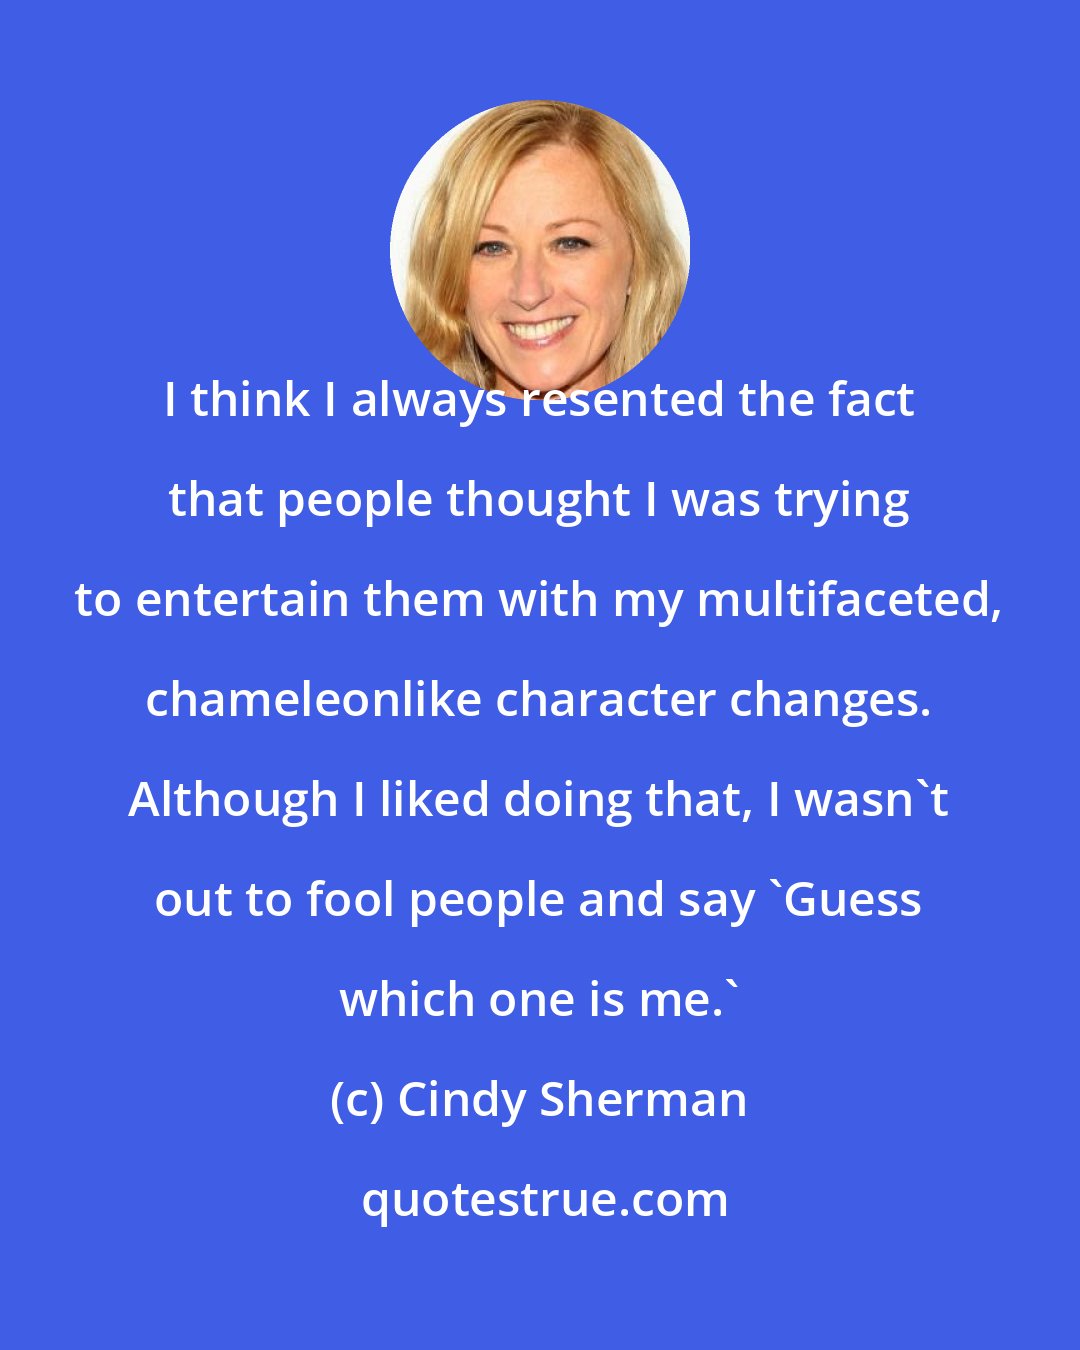 Cindy Sherman: I think I always resented the fact that people thought I was trying to entertain them with my multifaceted, chameleonlike character changes. Although I liked doing that, I wasn't out to fool people and say 'Guess which one is me.'